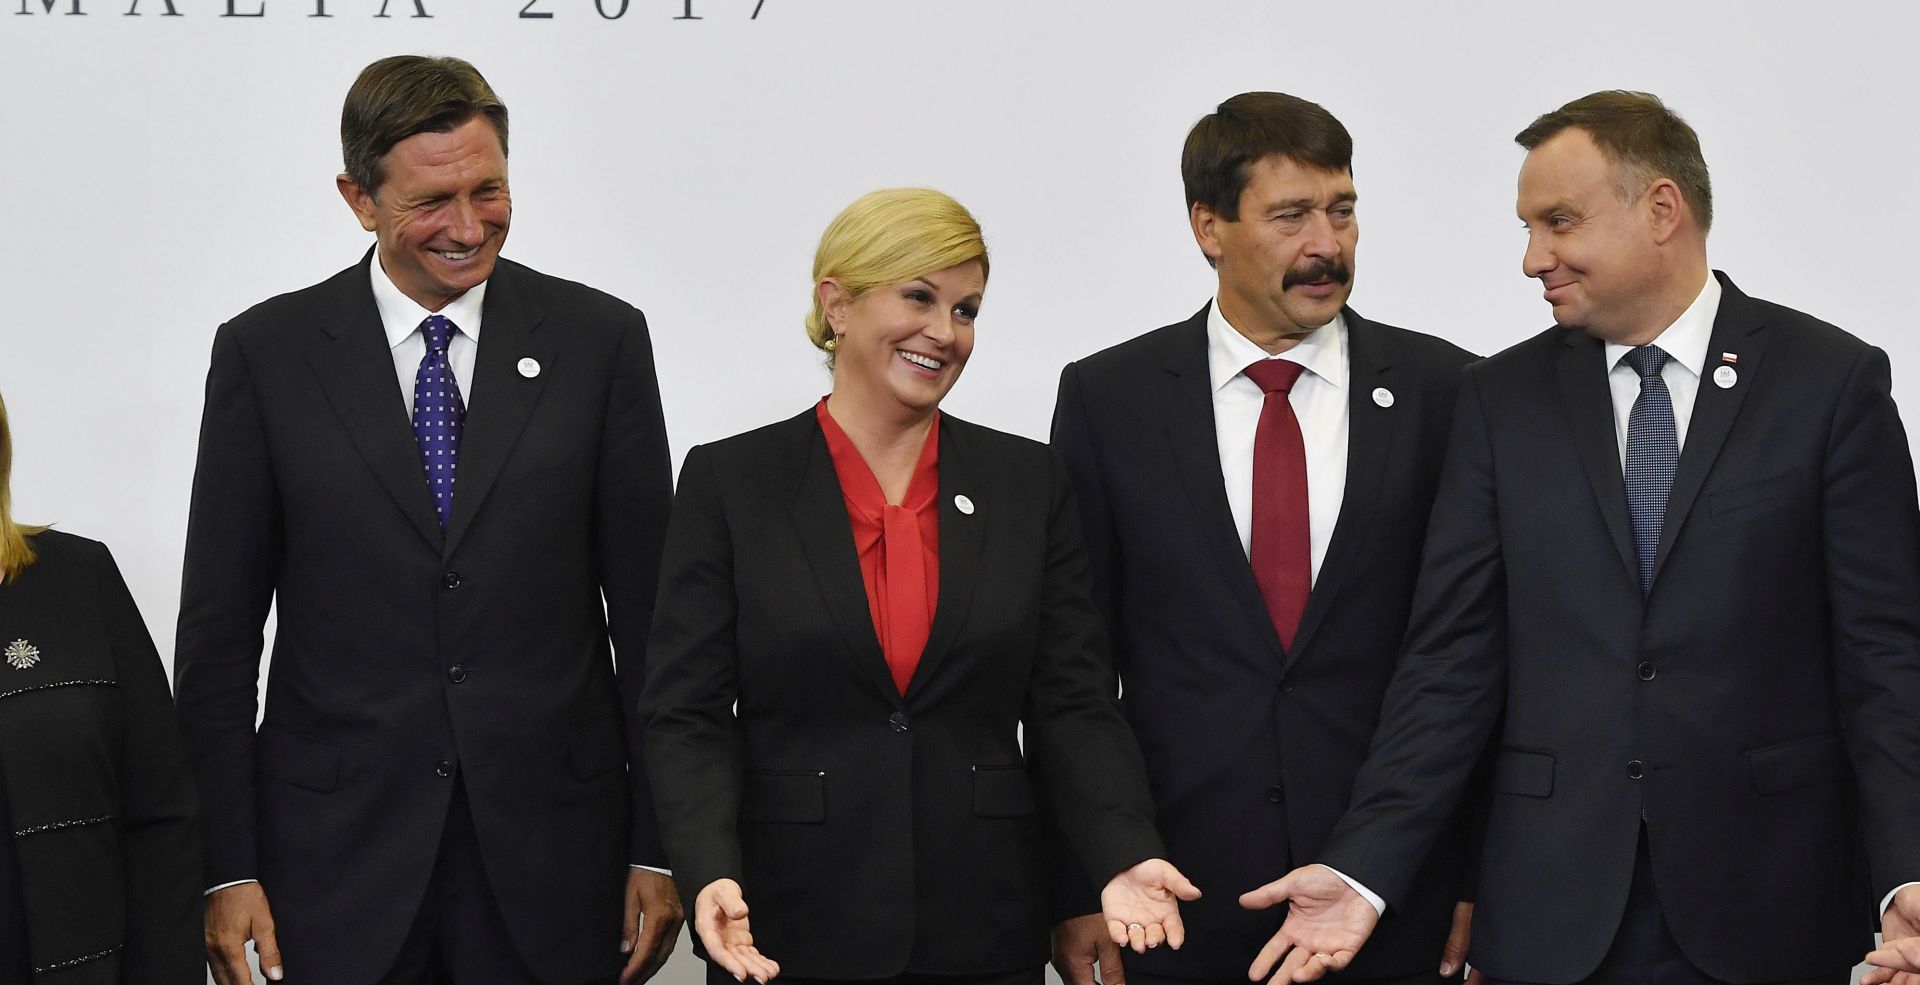 epa06204383 (L-R) Presidents Borut Pahor of Slovenia, Kolinda Grabar-Kitarovic of Croatia, Janos Ader of Hungary and Andrzej Duda of Poland  chat as they pose for the family photo, during the two-day presidential summit of Arraiolos Group in the Grandmaster's Palace in Valletta, Malta, 14 September 2017. Malta is hosting the 13th Meeting of the Heads of State of the Arraiolos Group between the 14 and 15 September 2017.  EPA/TIBOR ILLYES HUNGARY OUT